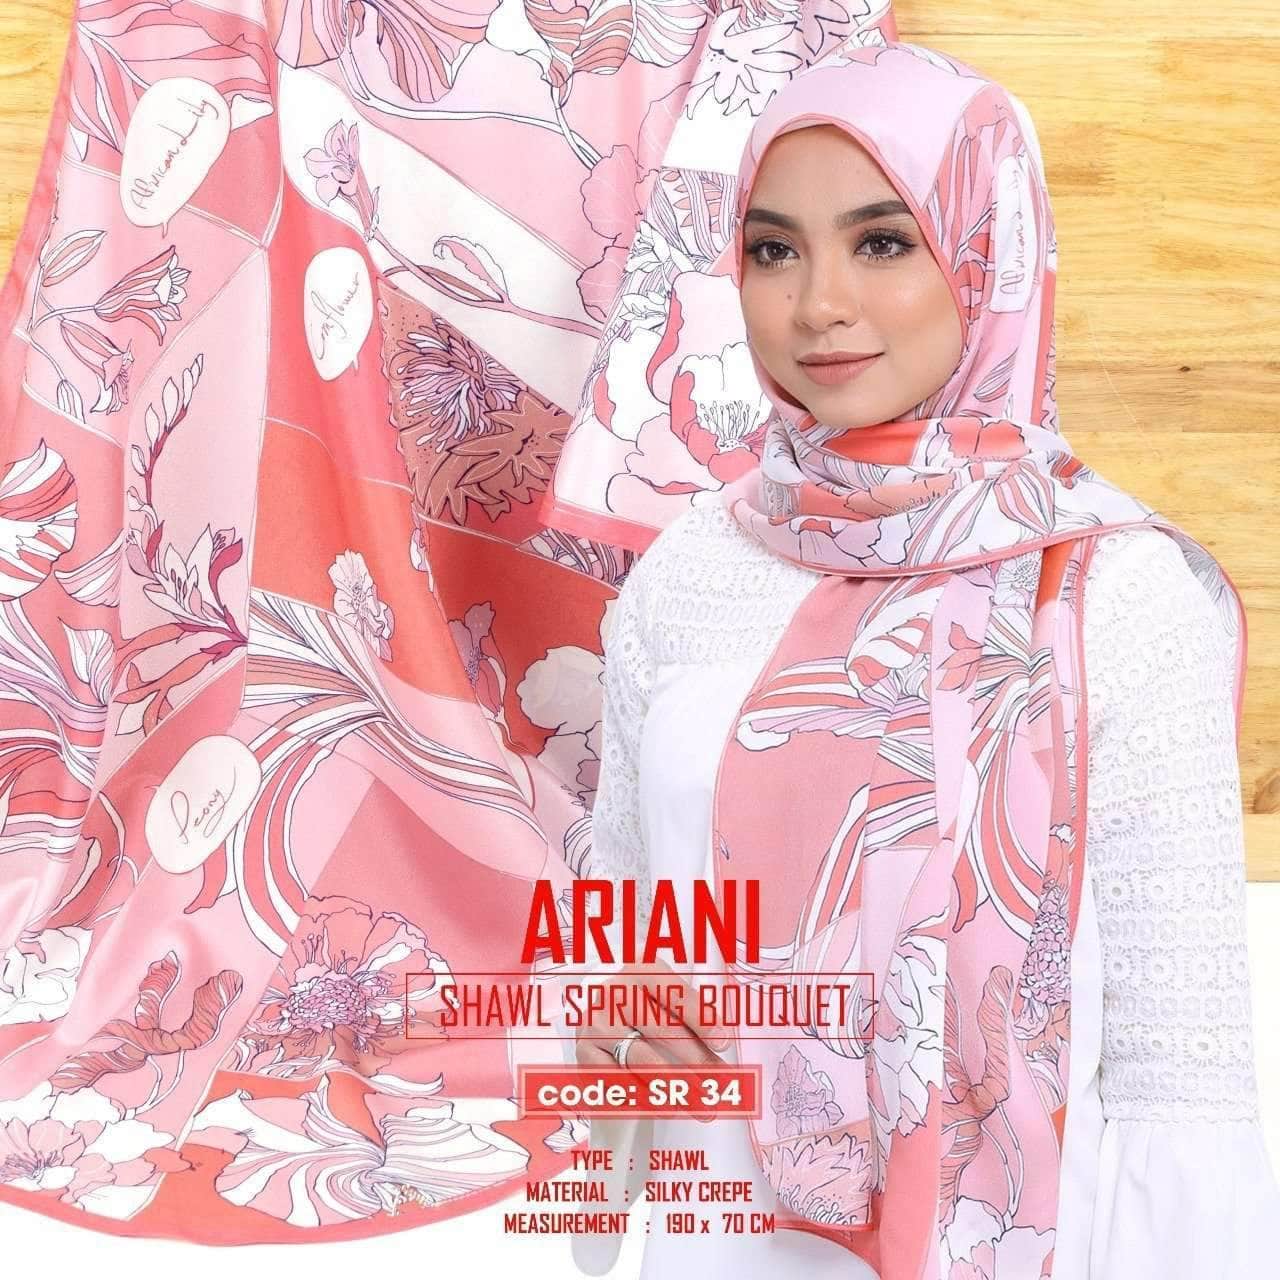 Ariani Shawl Spring Bouquet 3 Colors RM9